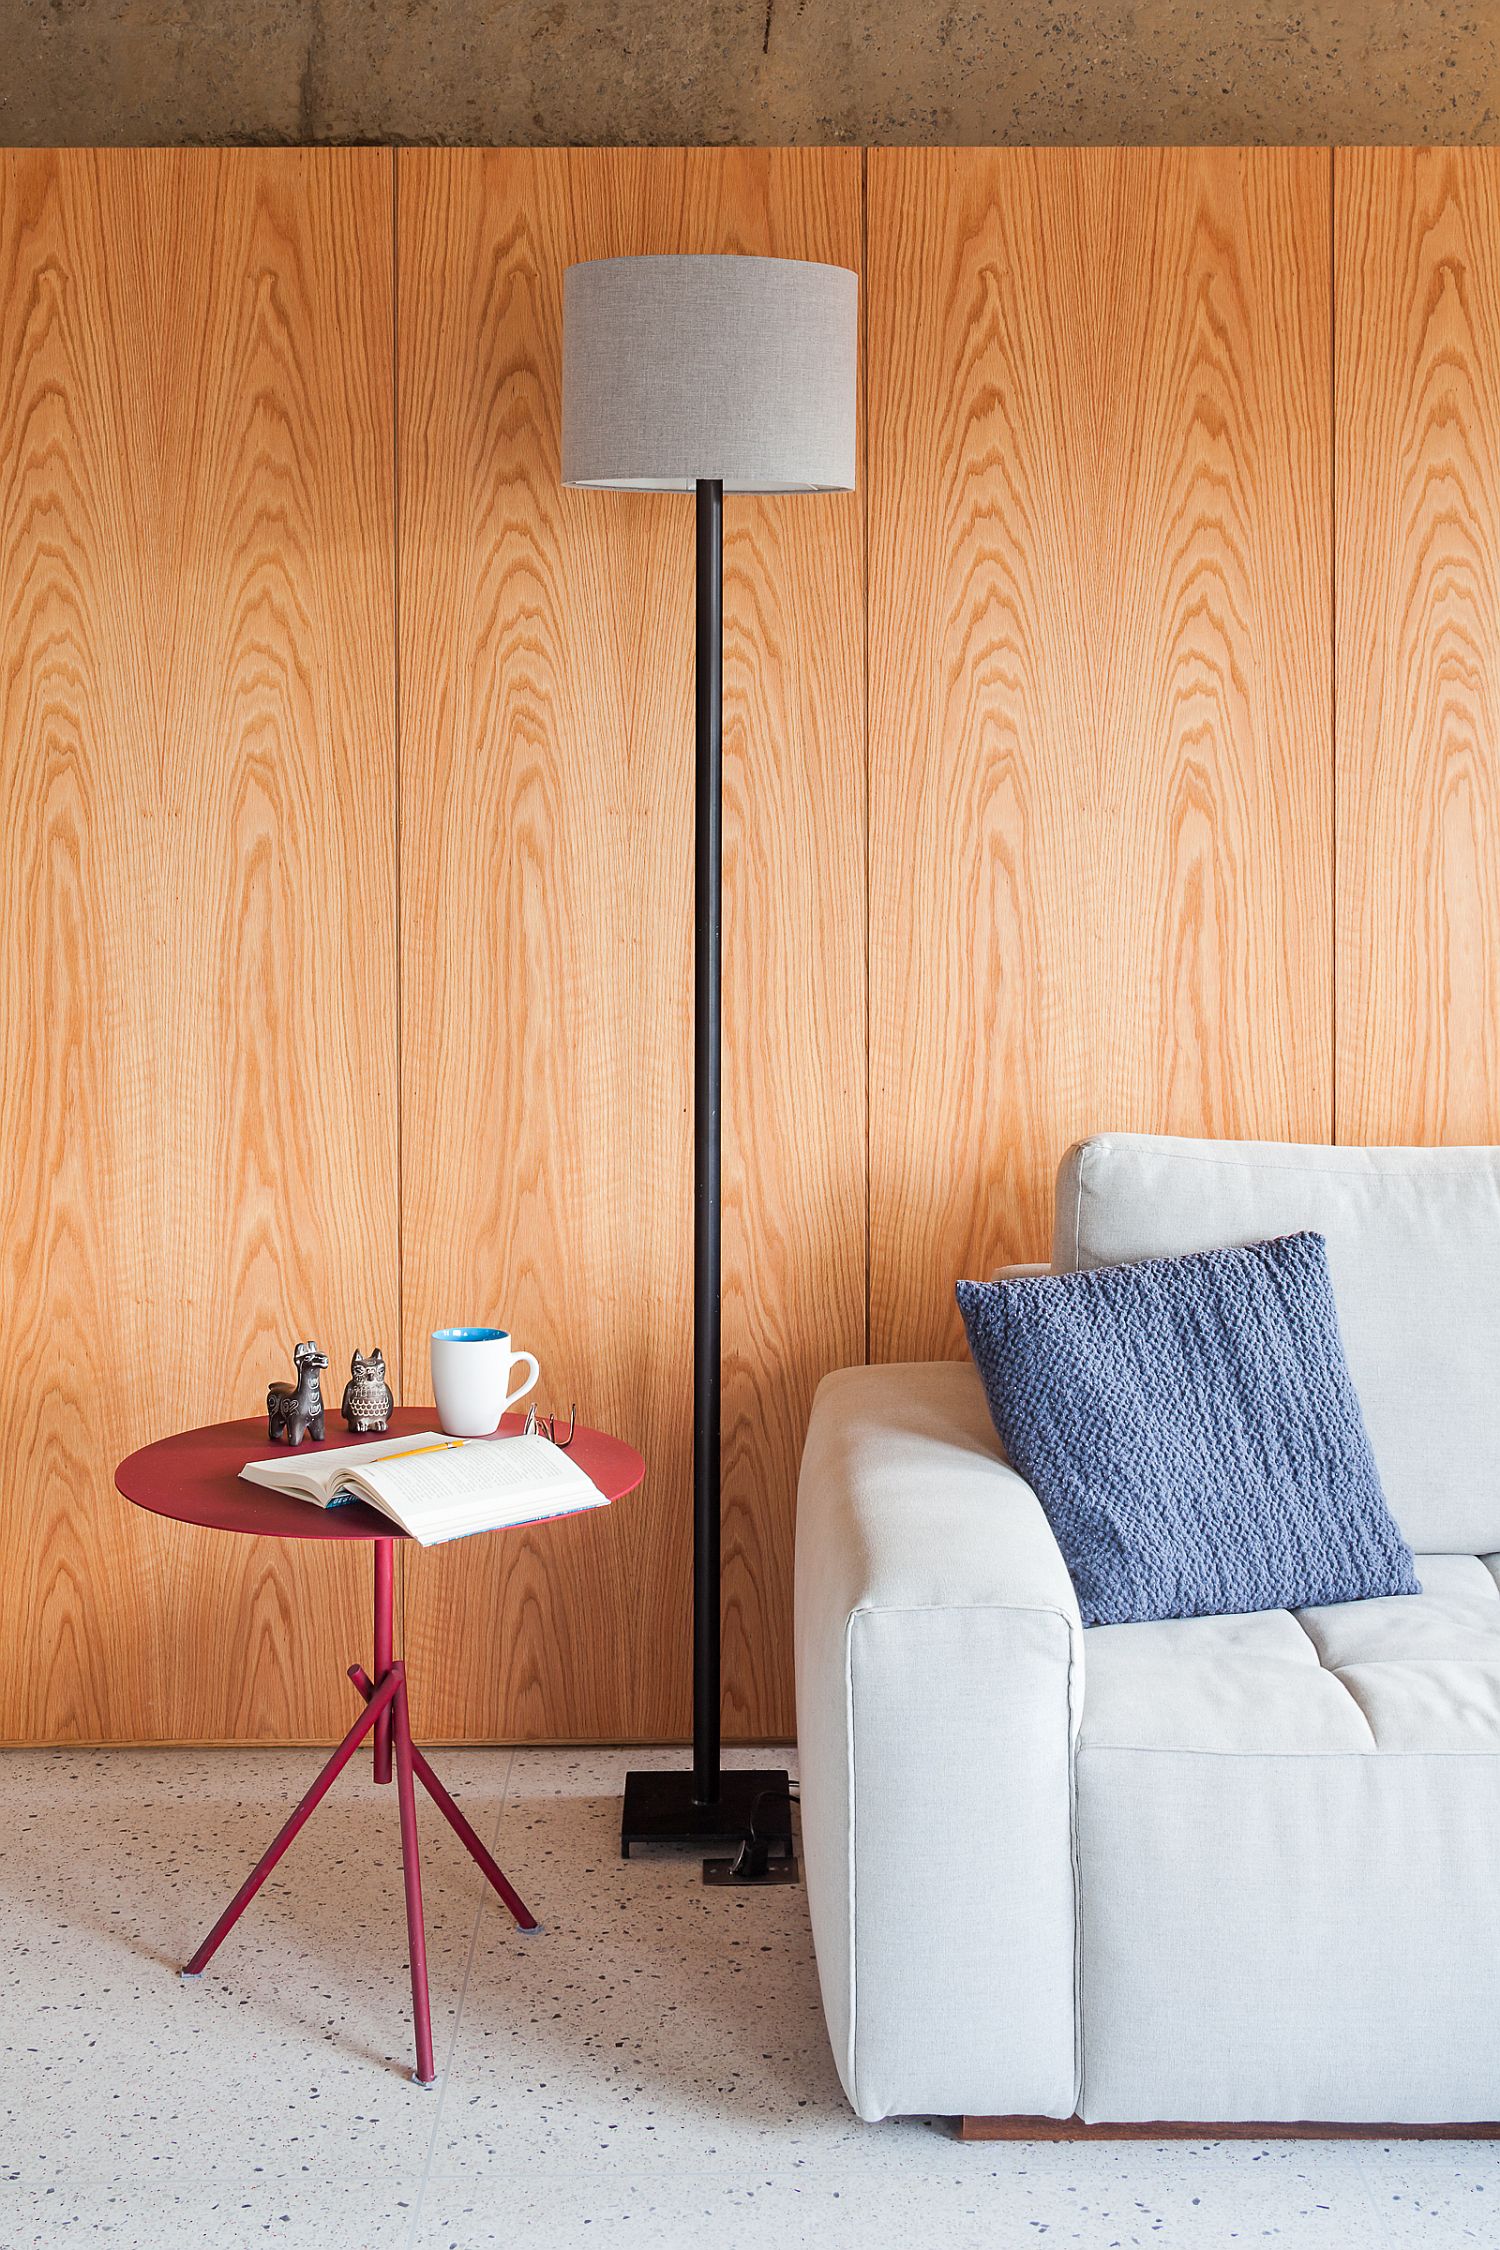 Wooden wall panels bring coziness to the apartment